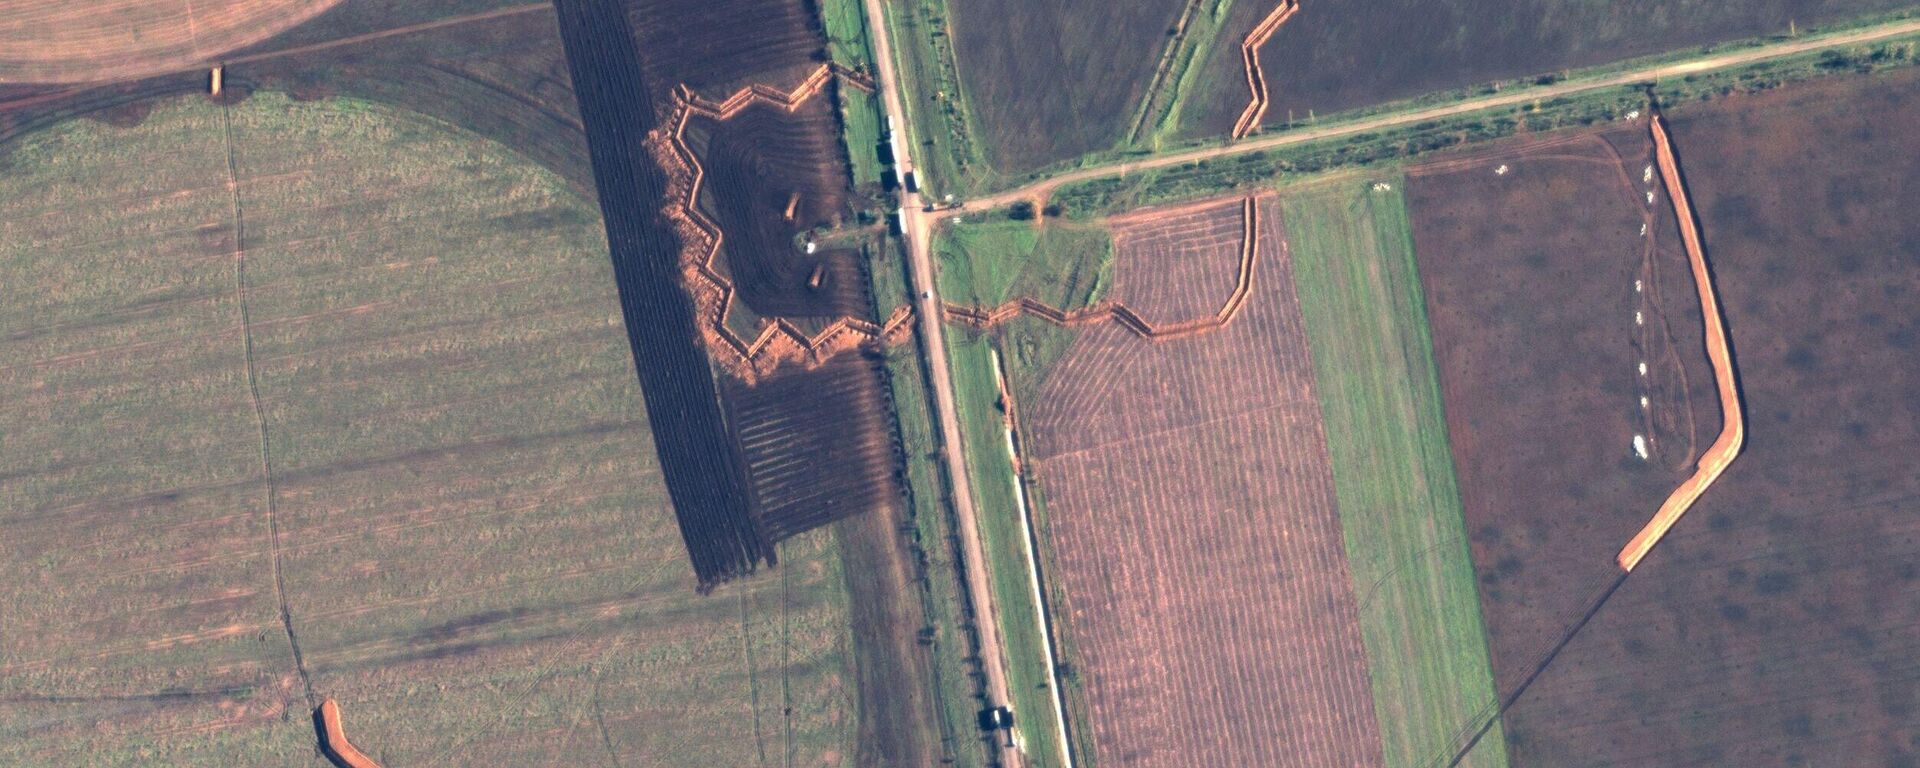 Satellite snap shows Russian fortifications being set up in the special operation zone, November 2022. - Sputnik International, 1920, 22.06.2023